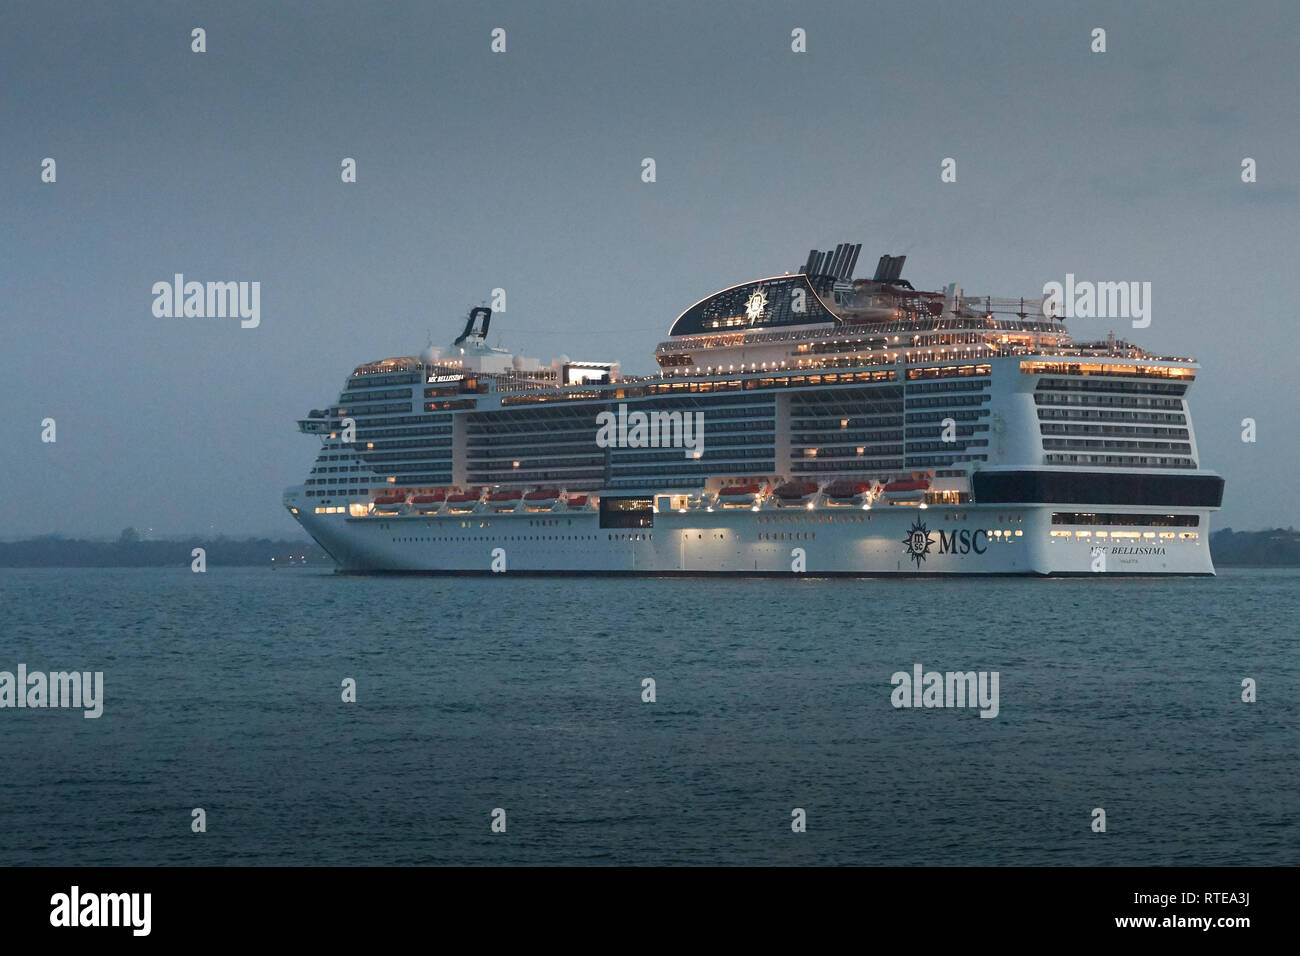 Southampton, UK. 01st March, 2019. MSC Cruises New Flag Ship, MSC BELLISSIMA, On Her Maiden Voyage From St. Nazaire, France, Entering  The Port Of Southampton, UK. 1st March 2019. Credit: Jon Lord/Alamy Live News Stock Photo